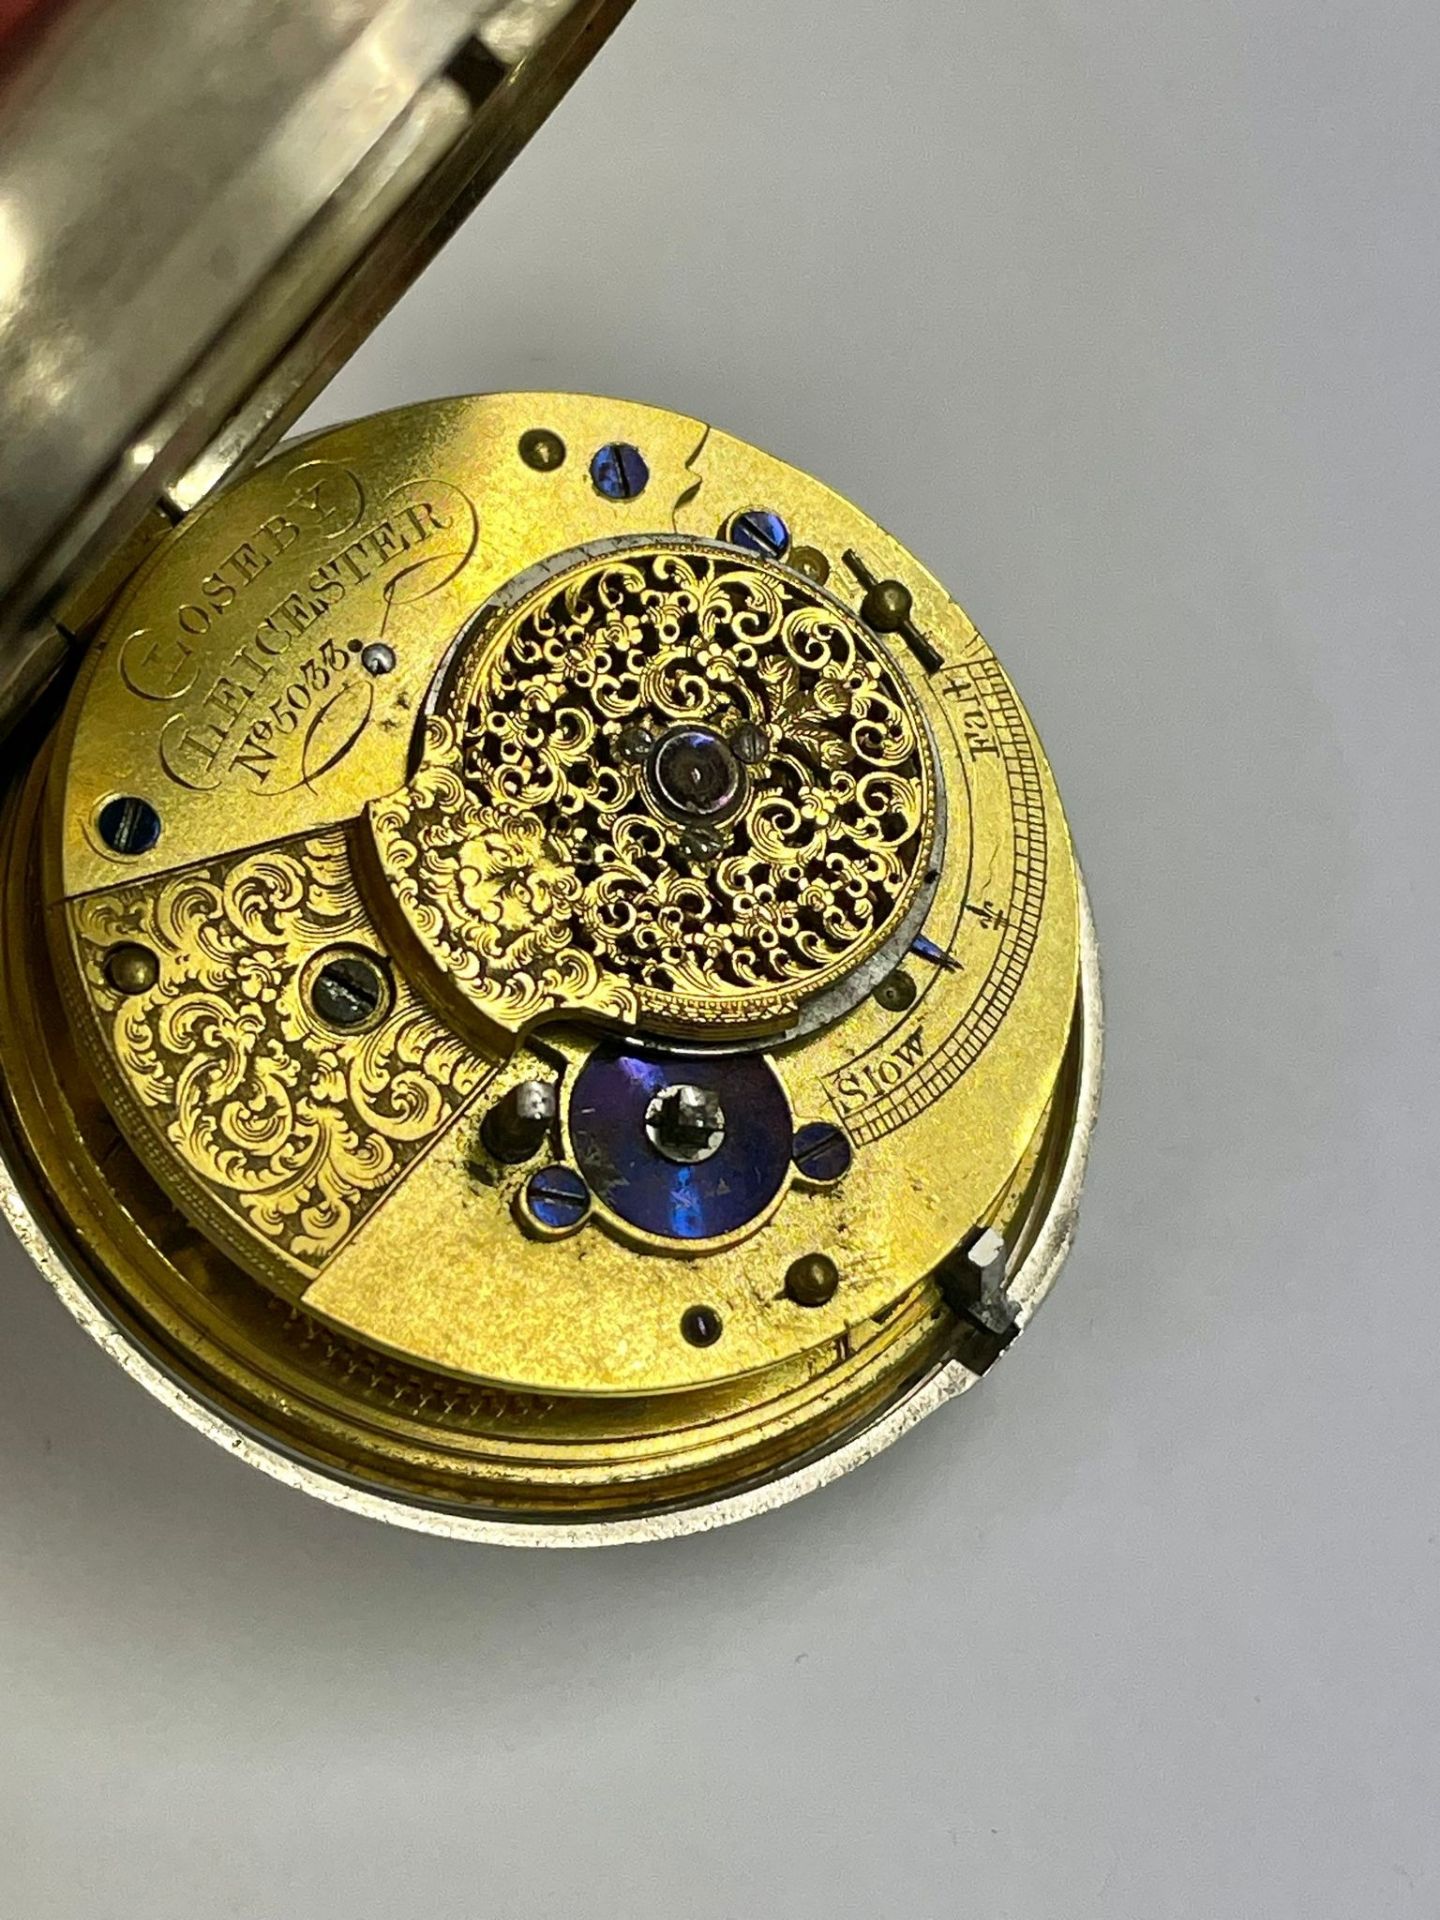 An Antique silver verge fusee pocket watch, as found. - Image 3 of 4